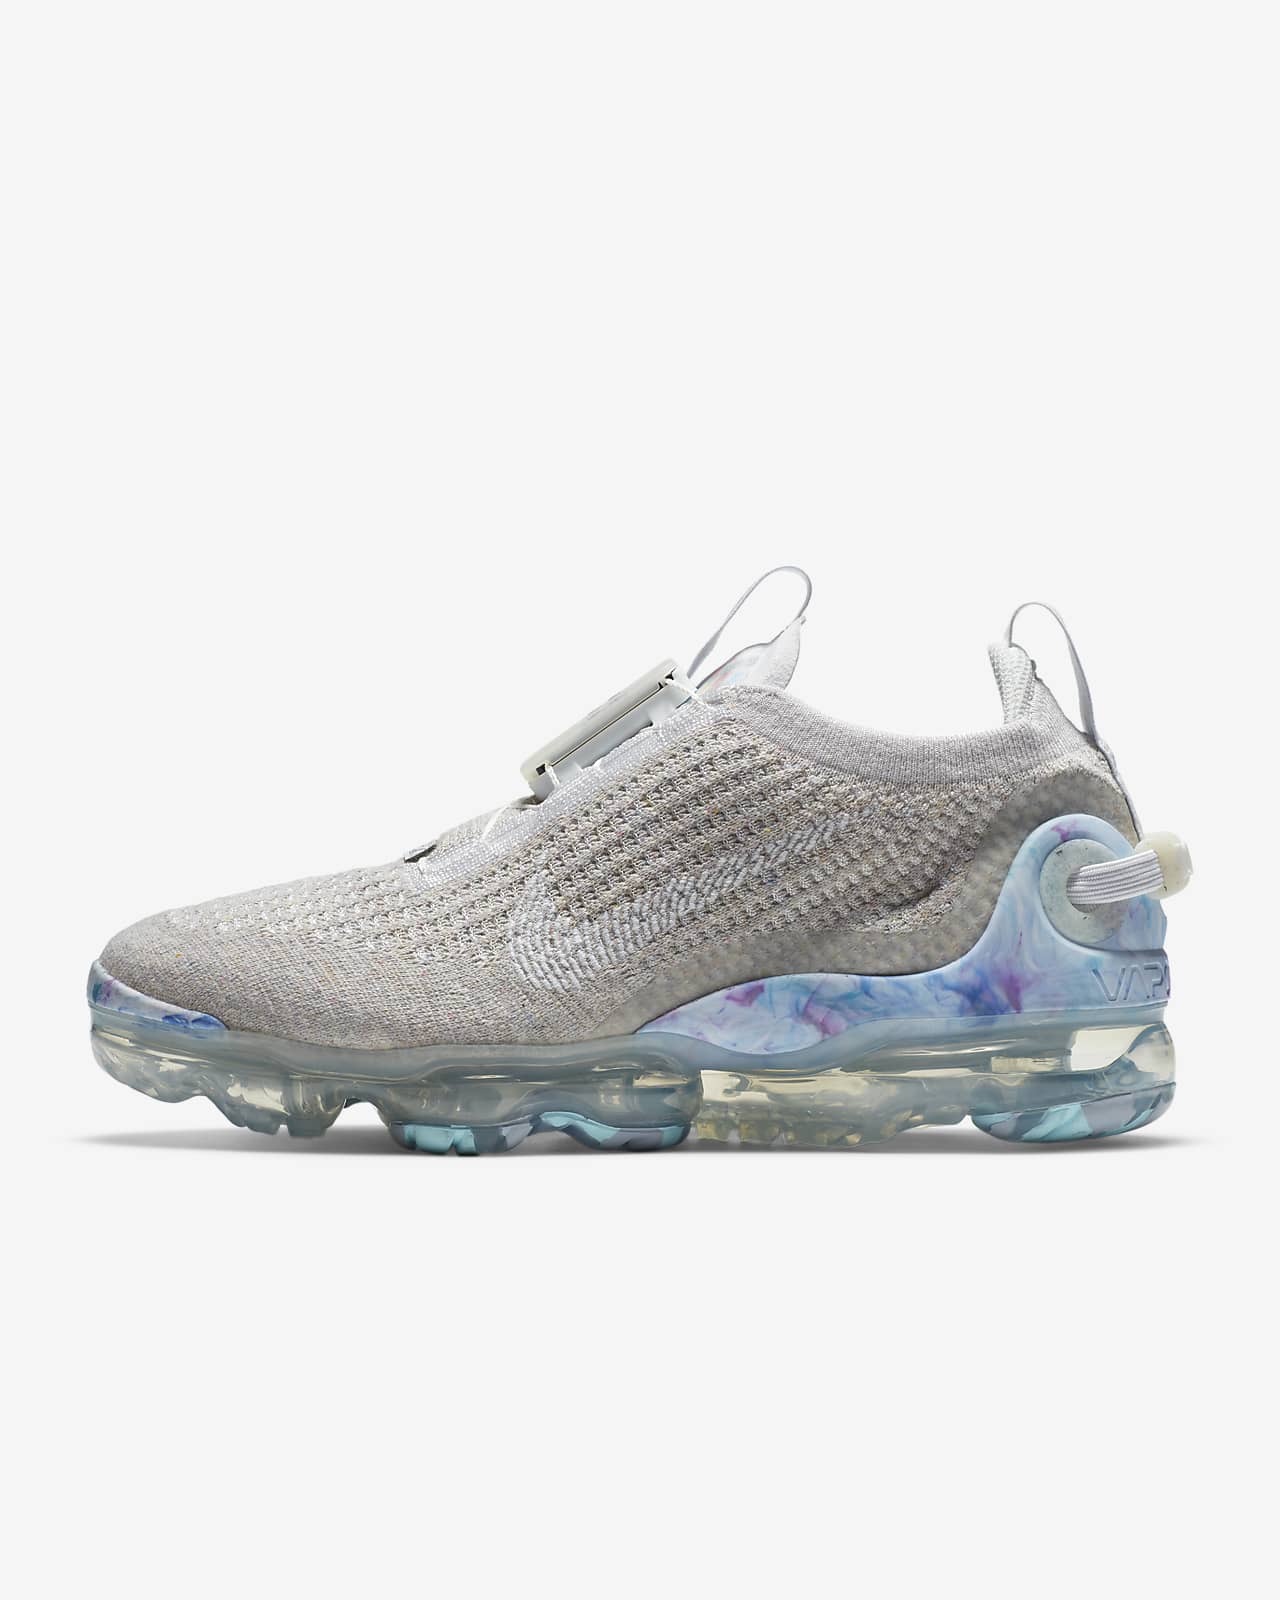 Buy White Nike Air VaporMax 360 Womens in 2020 With